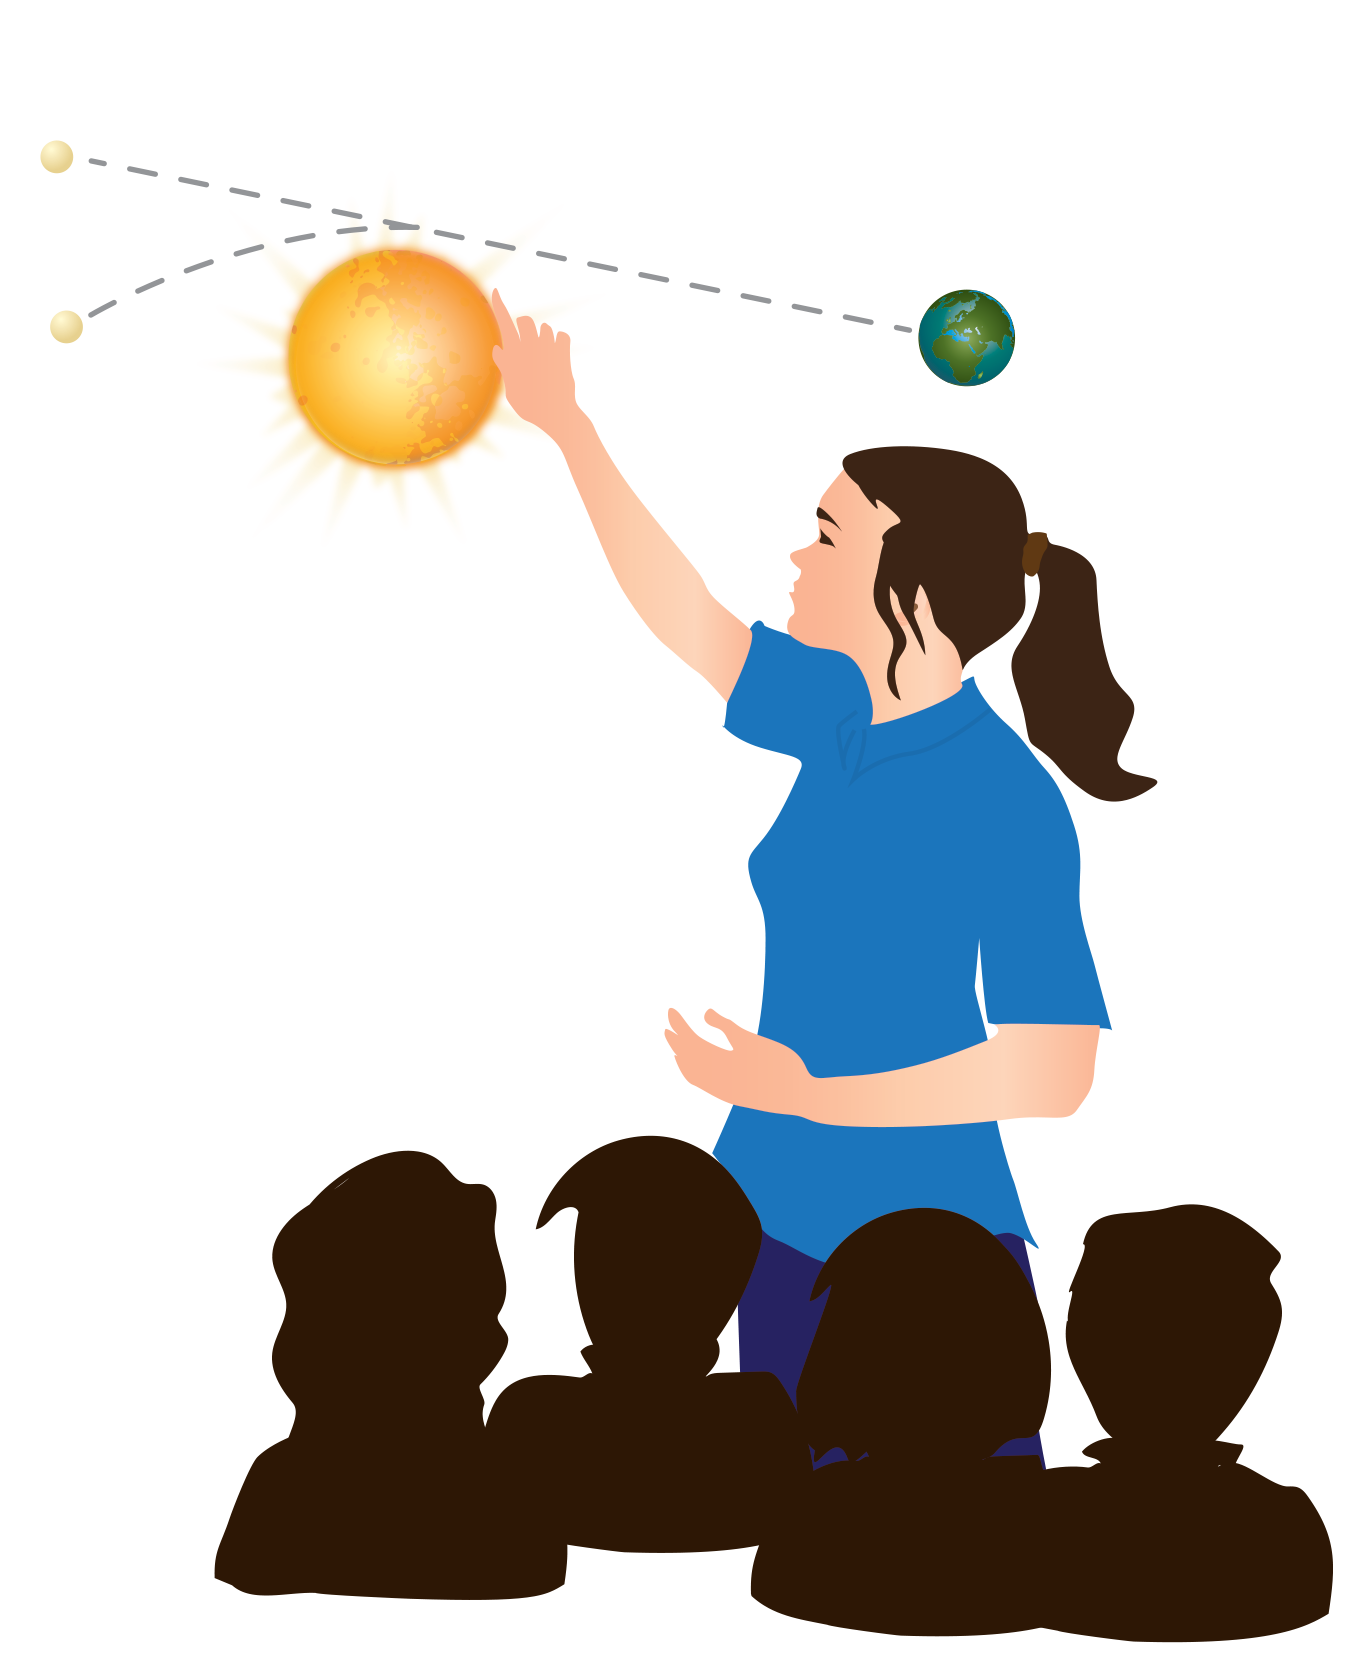 A woman with long hair in a ponytail gestures upward toward the sun with dotted lines indicating the orbits of the (much smaller) Earth and other stars. The silhouette of a group of students or viewers watches them. 